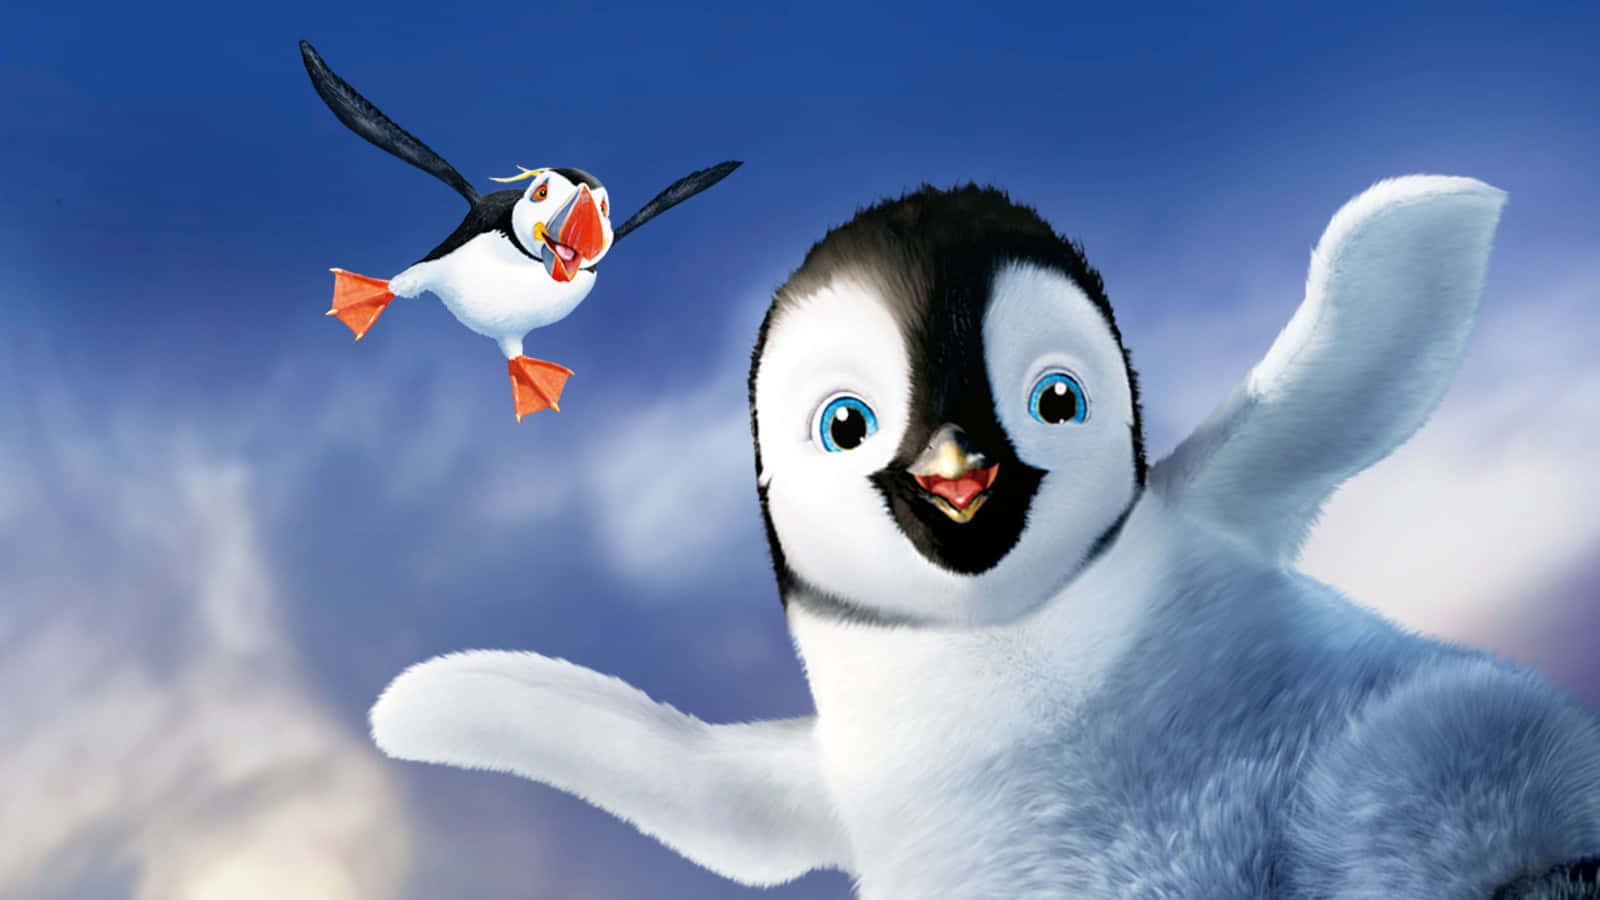 Download Erik Gliding On Ice In Happy Feet Two Wallpaper | Wallpapers.com